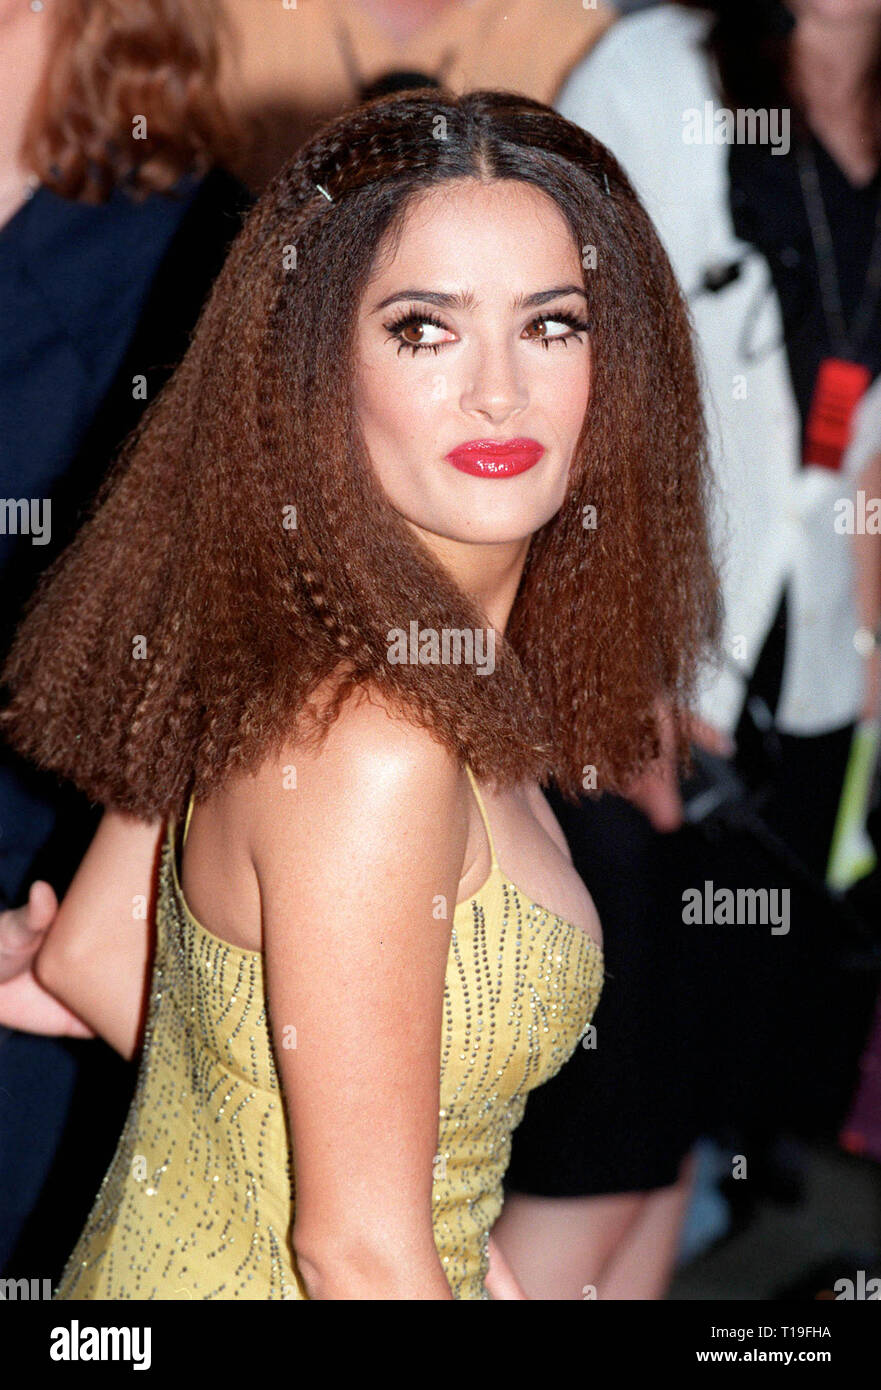 LOS ANGELES, CA - August 24, 1998: Actress SALMA HAYEK at the world premiere, in Hollywood, of her new movie, '54.'  The movie, based on New York's Studio 54 Disco, also stars Mike Myers, Ryan Phillippe & Neve Campbell. Stock Photo